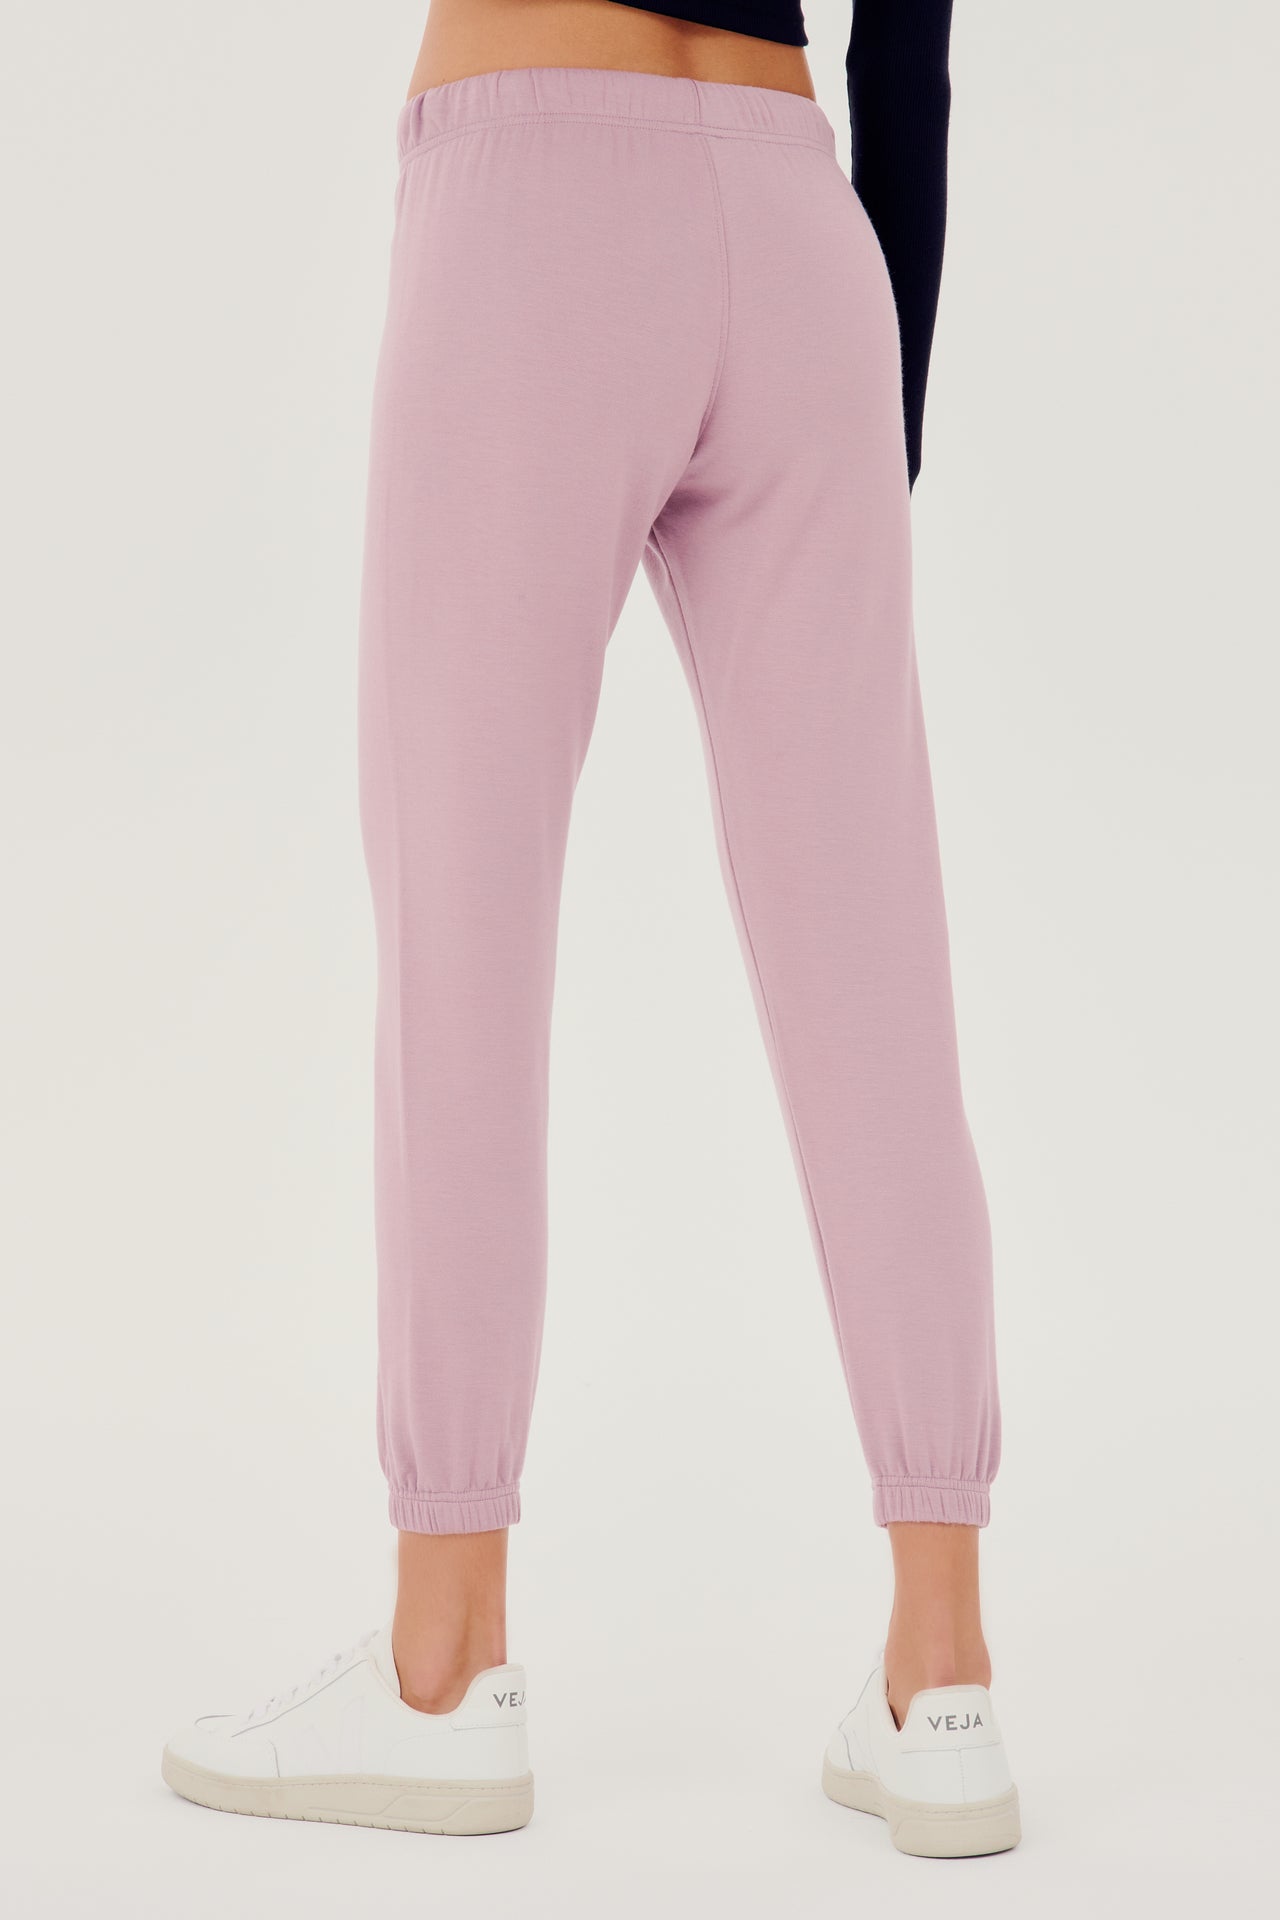 Back view of woman wearing light pink sweatpant jogger with white drawstring and black turtleneck cropped long sleeve paired with white shoes